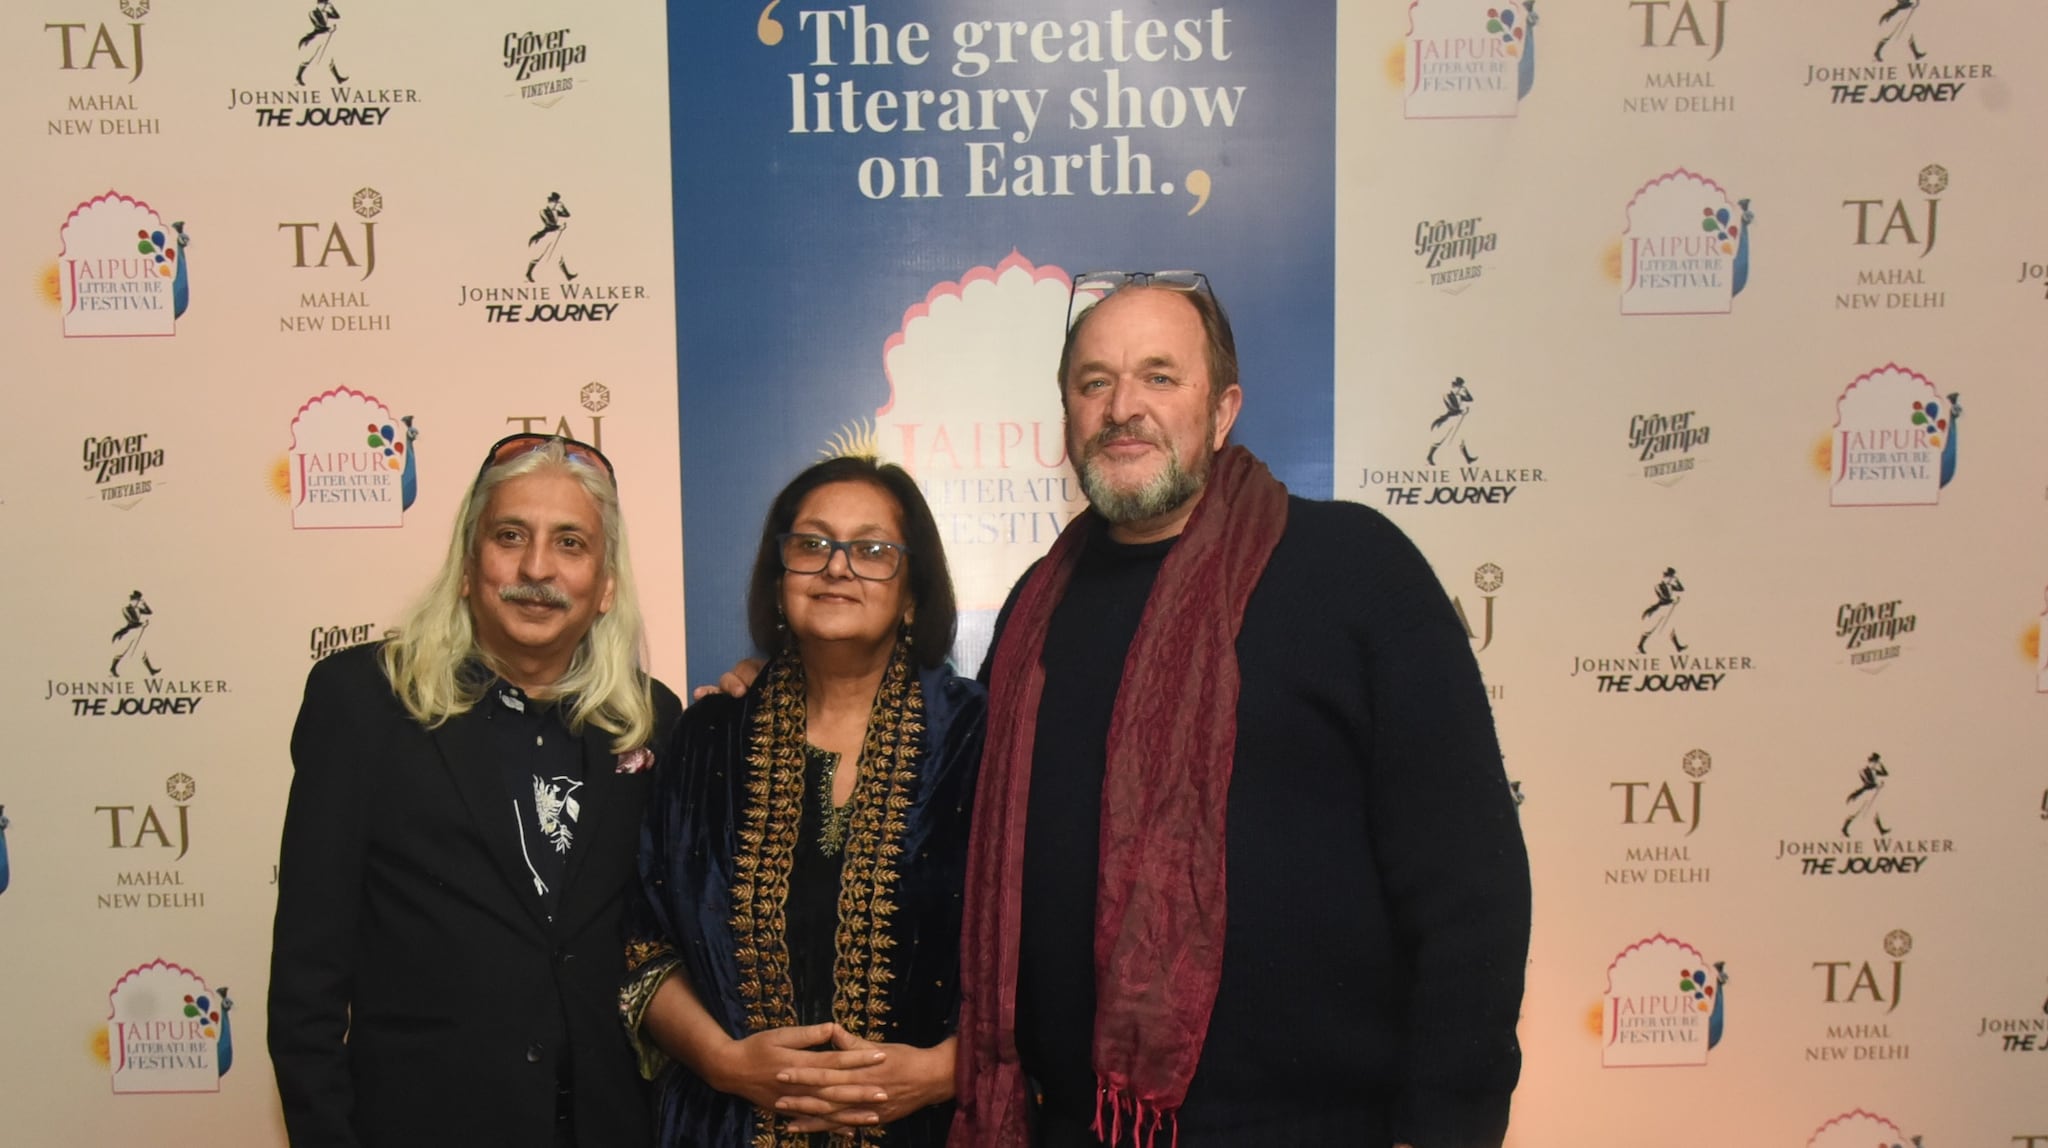 Festival producer Sanjoy K. Roy (left) with founder-directors Namita Gokhale (centre) and William Dalrymple.